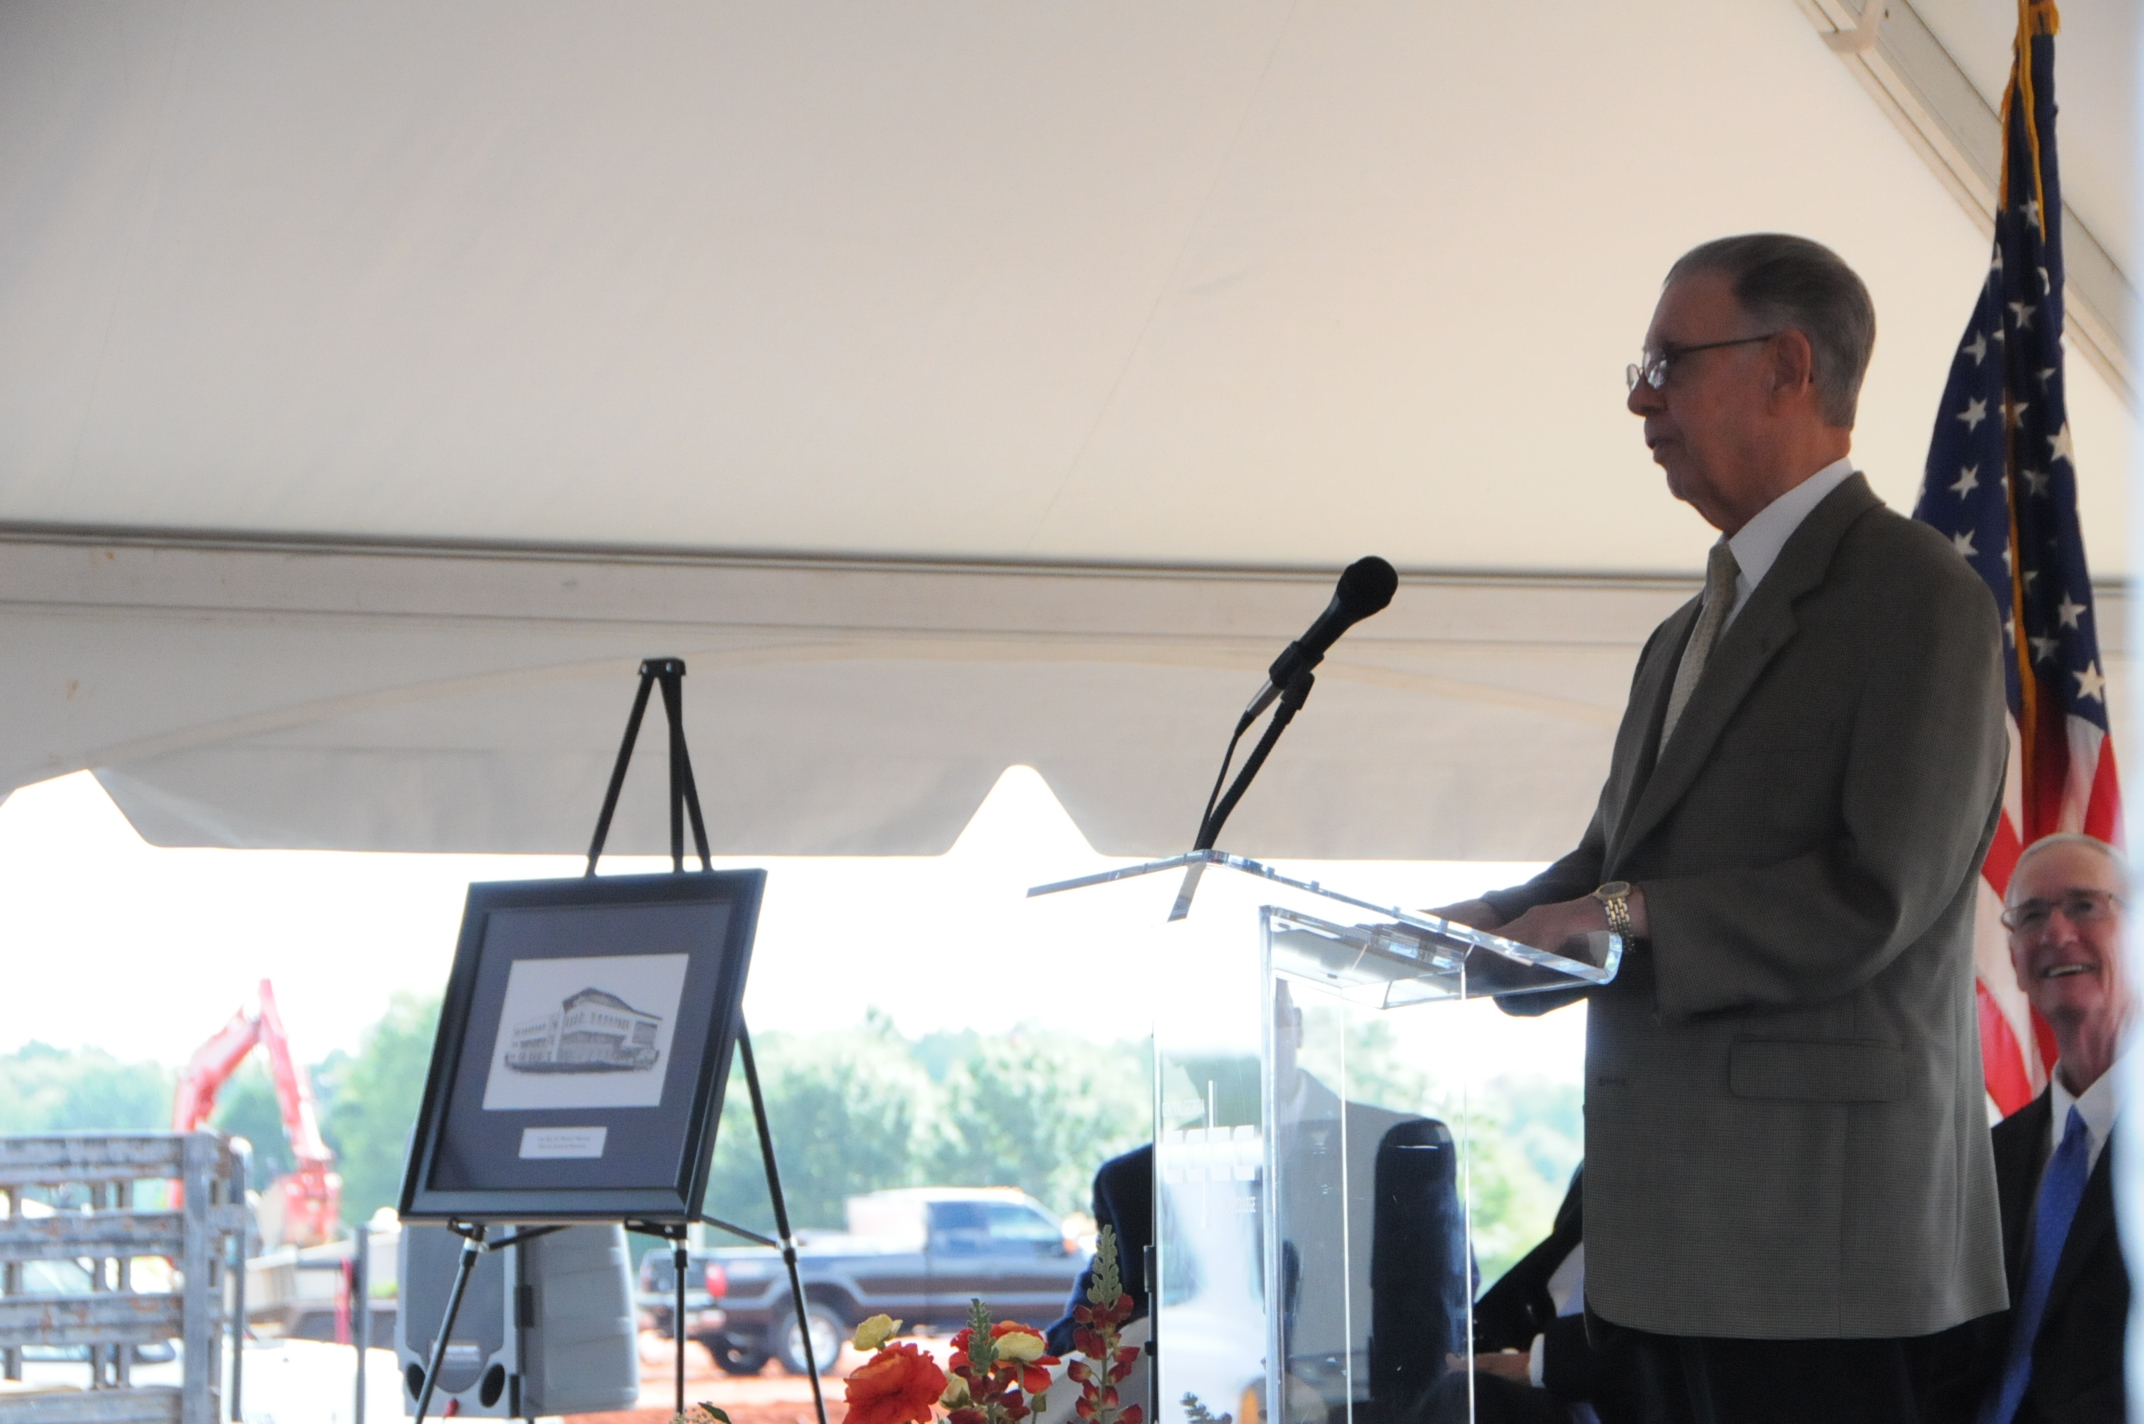 Mr. Watson speaks at the groundbreaking of the Roy H. “Sonny” Watson Health Sciences Building at the CGTC Warner Robins campus in October 2014.